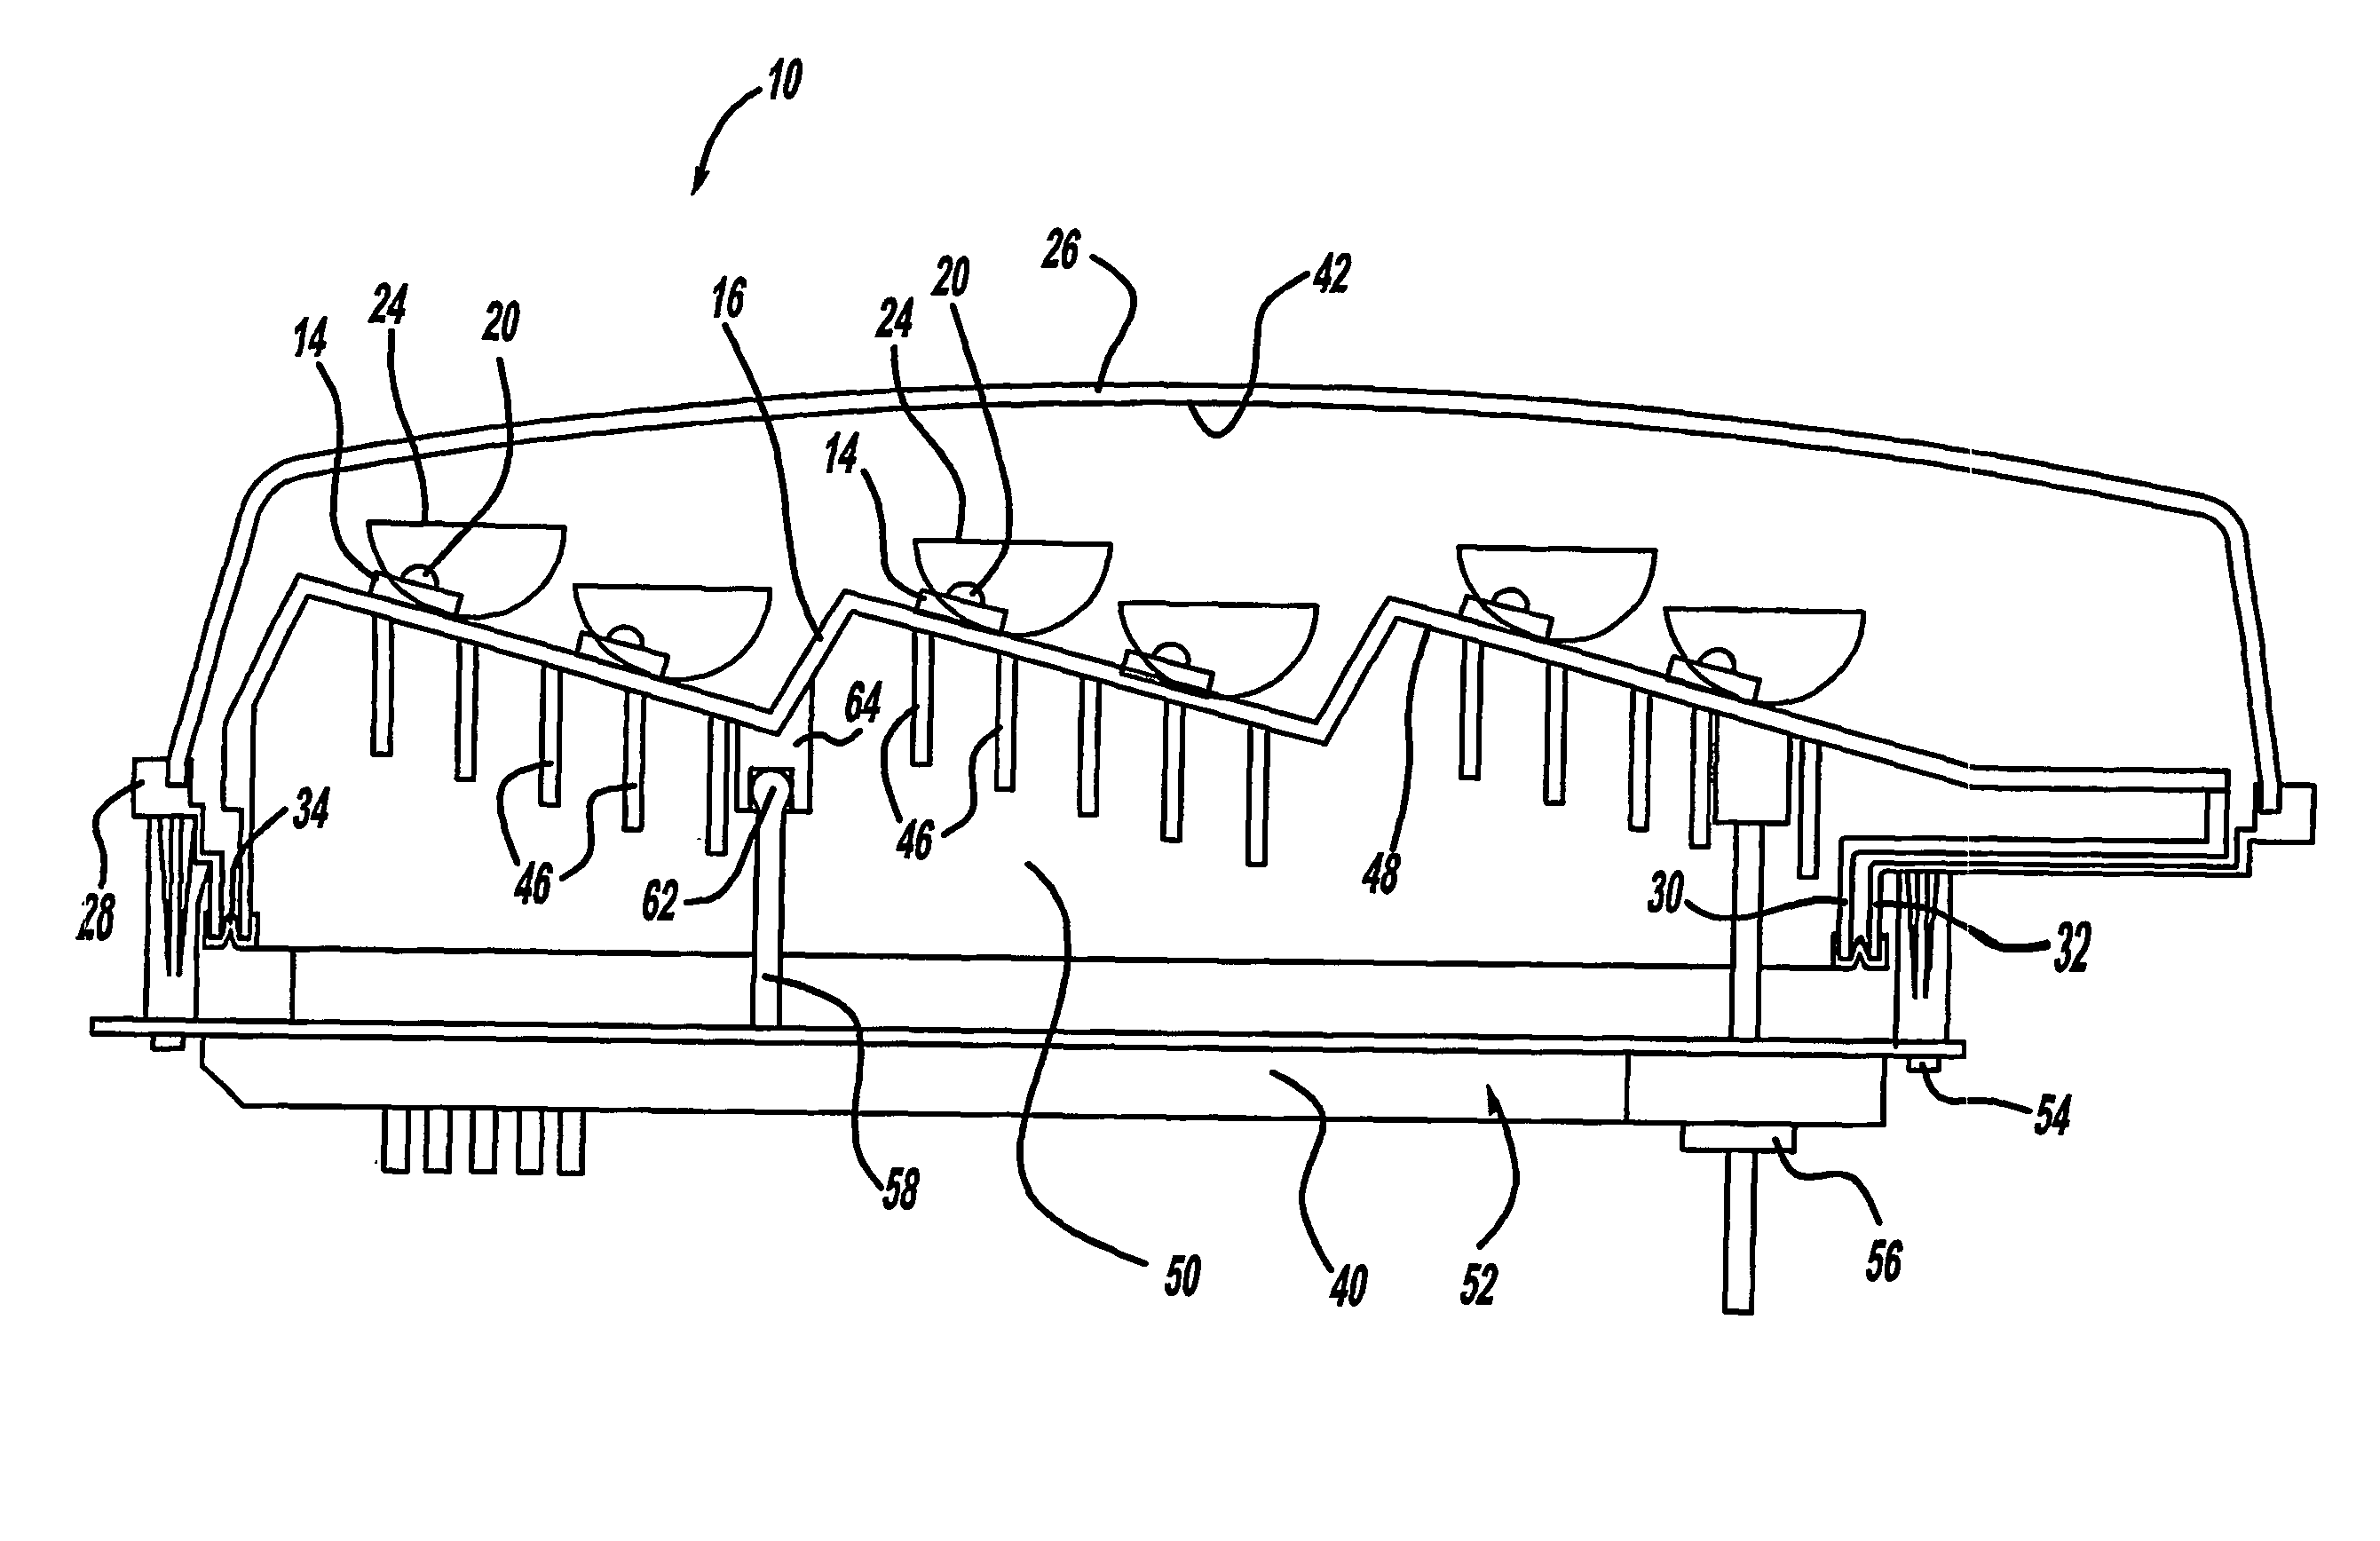 Apparatus and method for mounting and adjusting LED headlamps